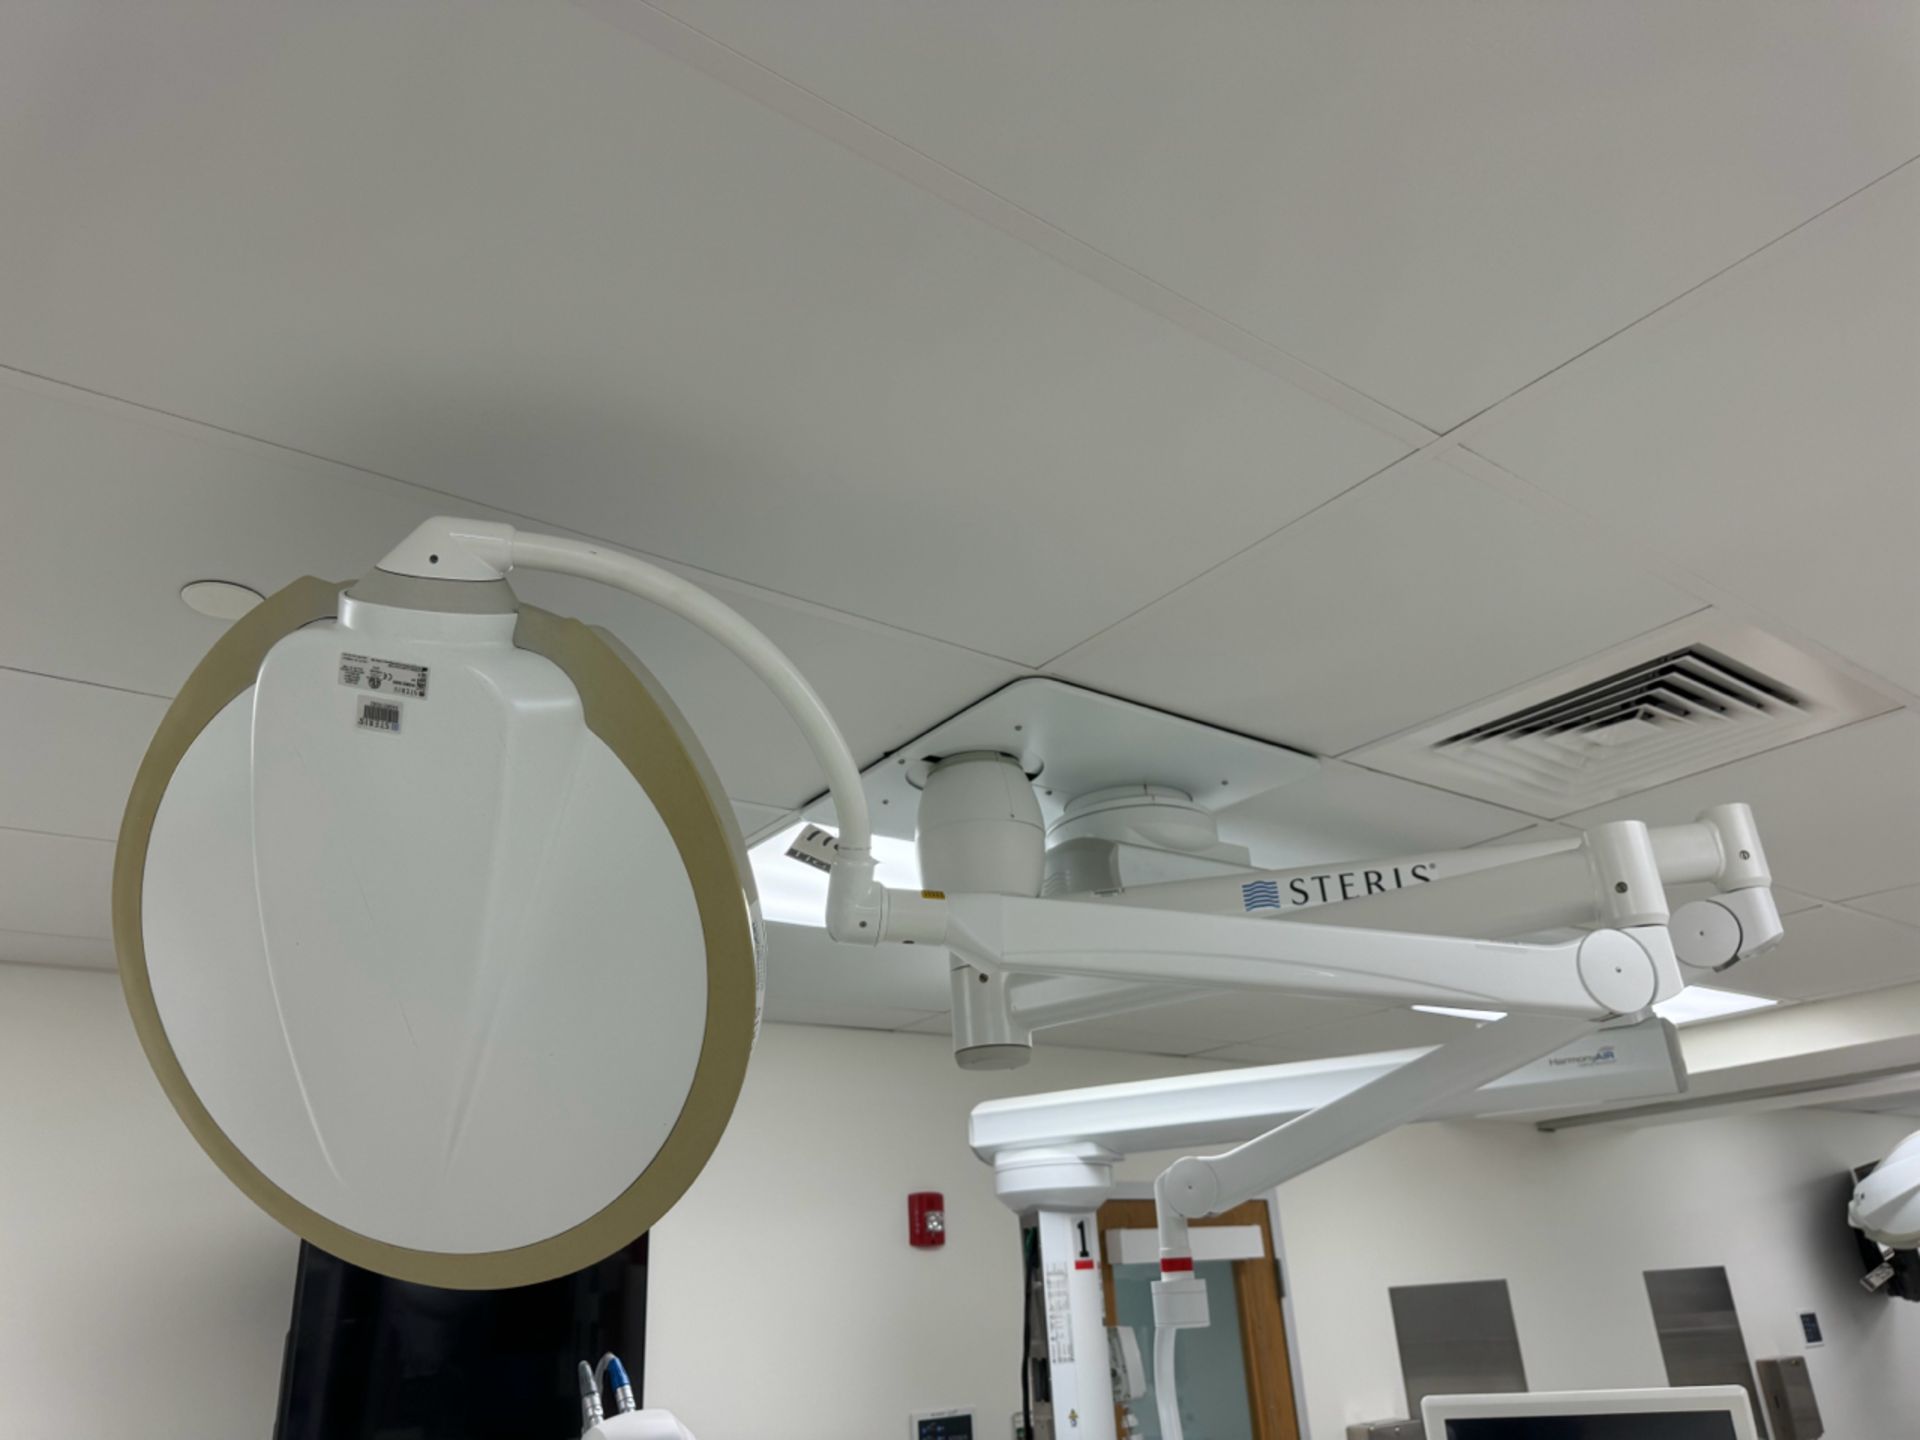 Steris Surgical Lighting System - Image 2 of 7